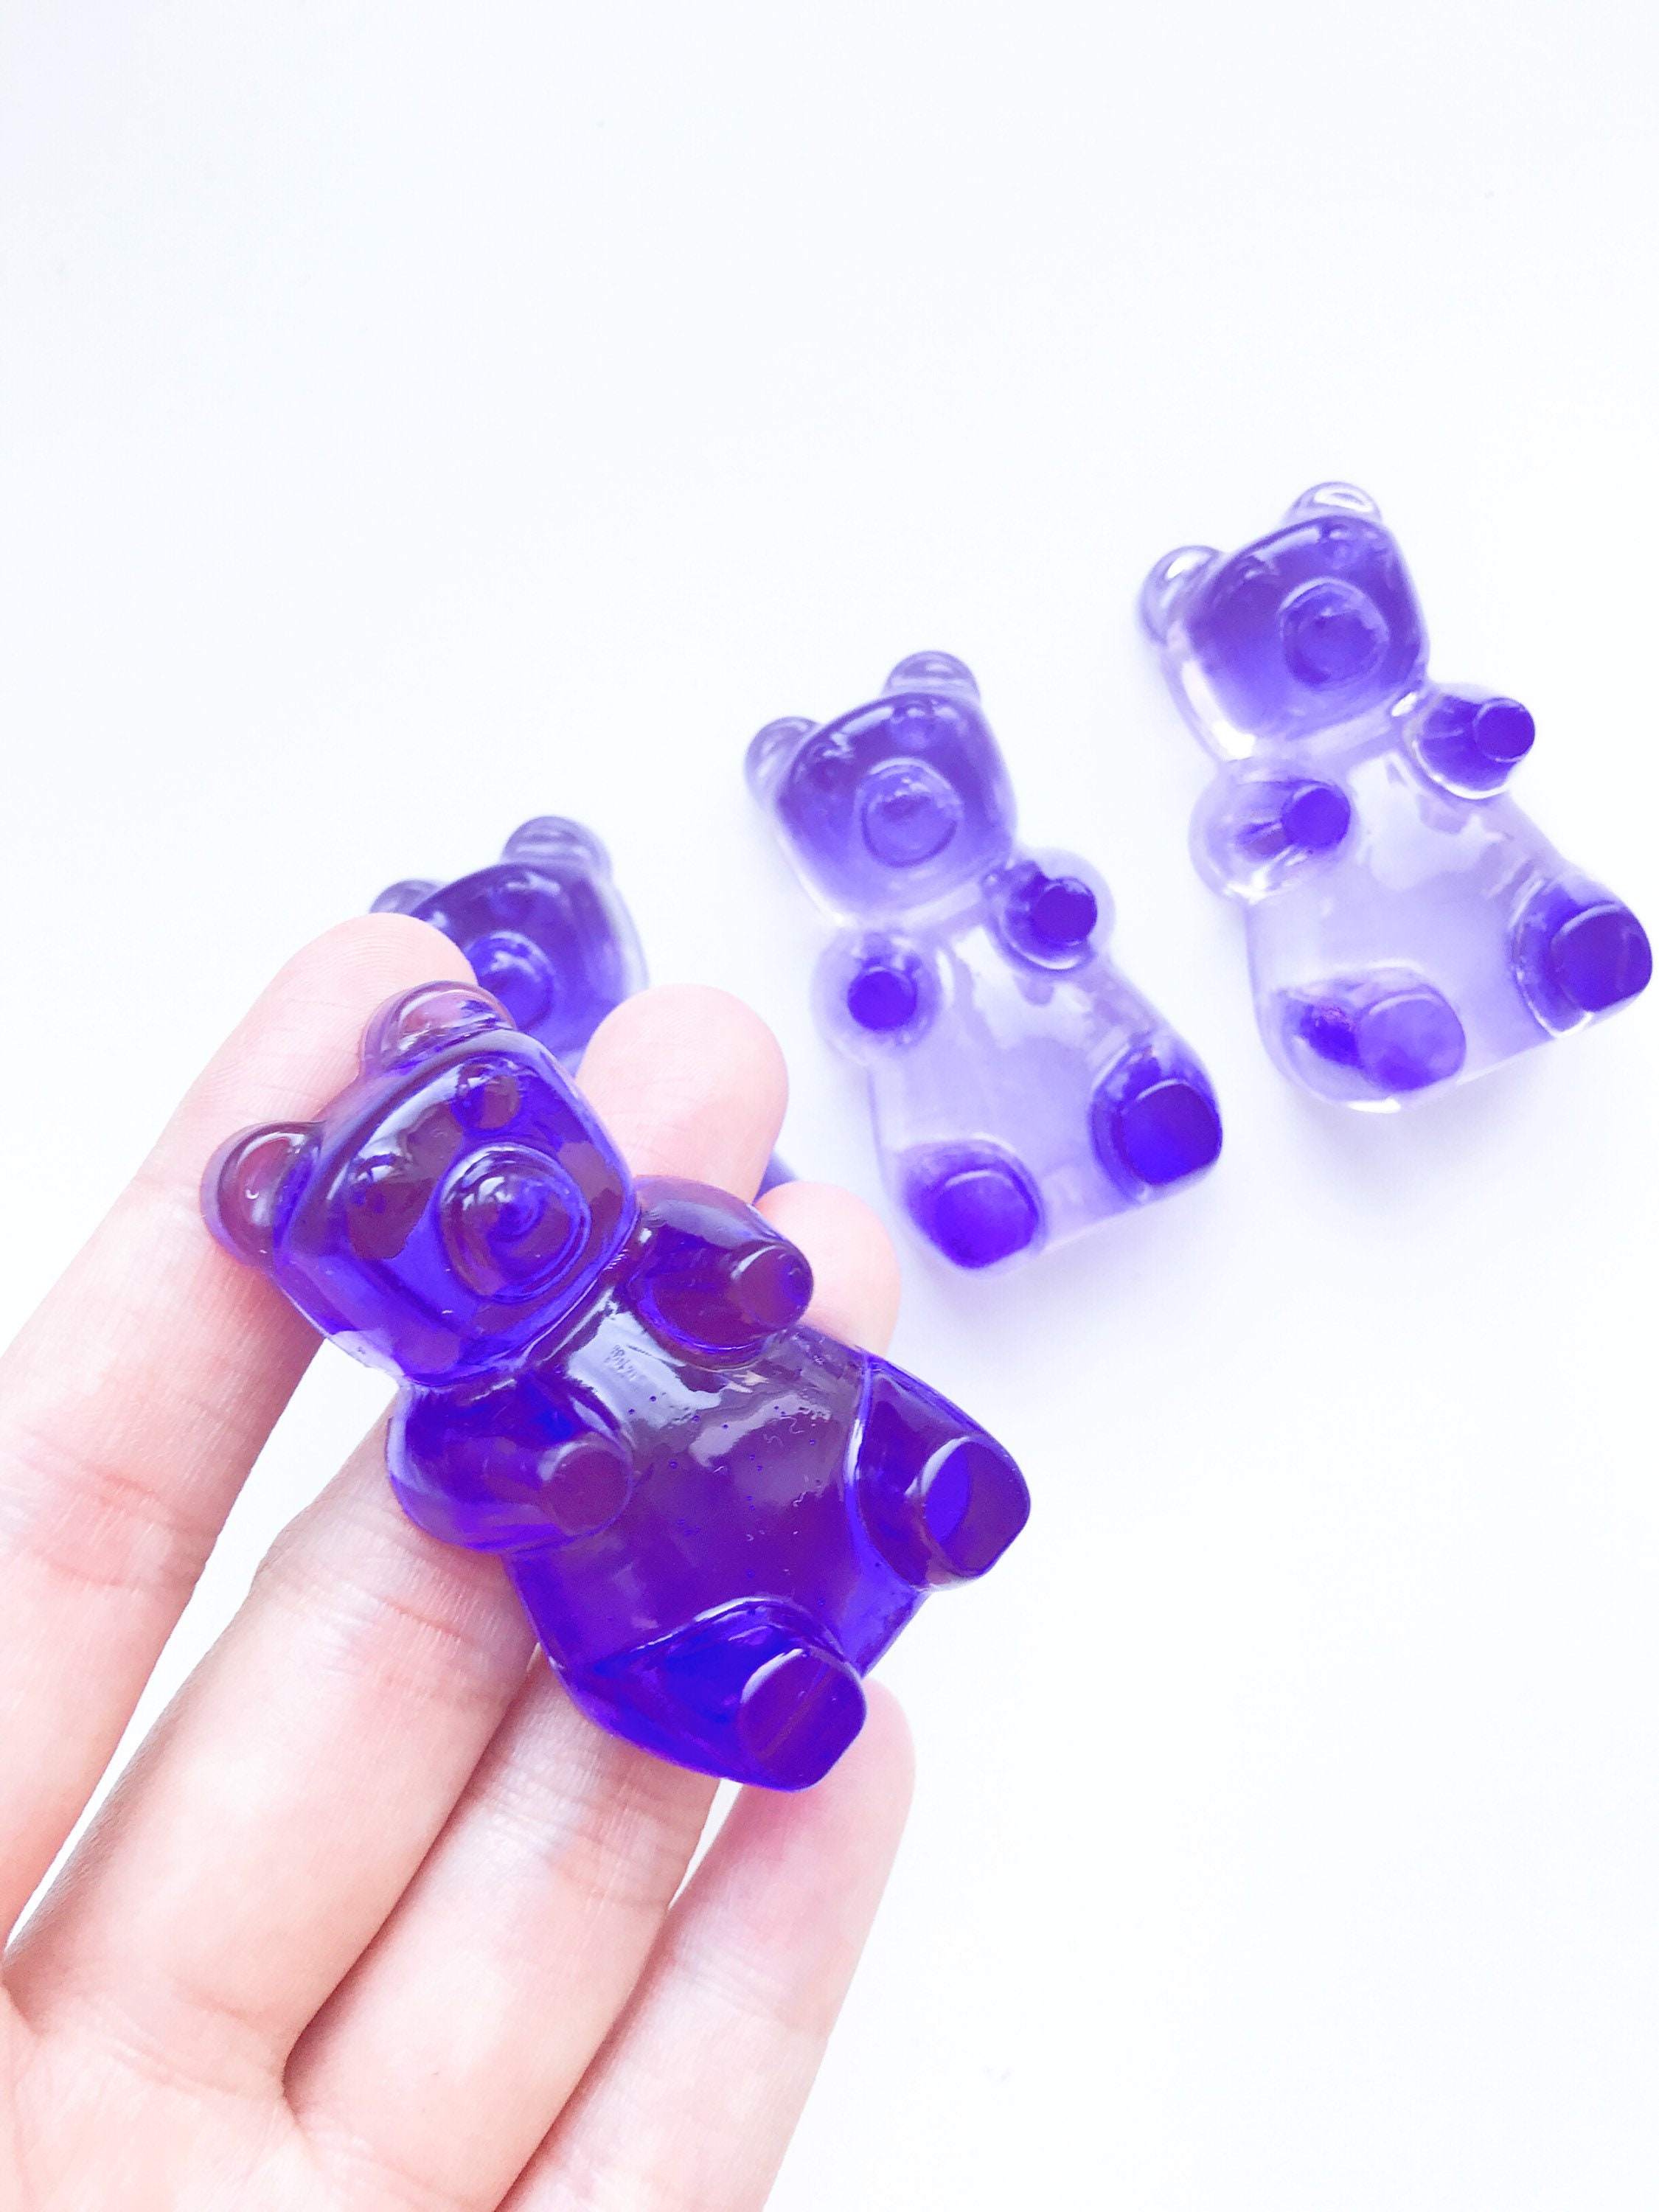 Gummy Bears Clear Silicone Mold 9 Cavityes 17 Mm Height X Approx